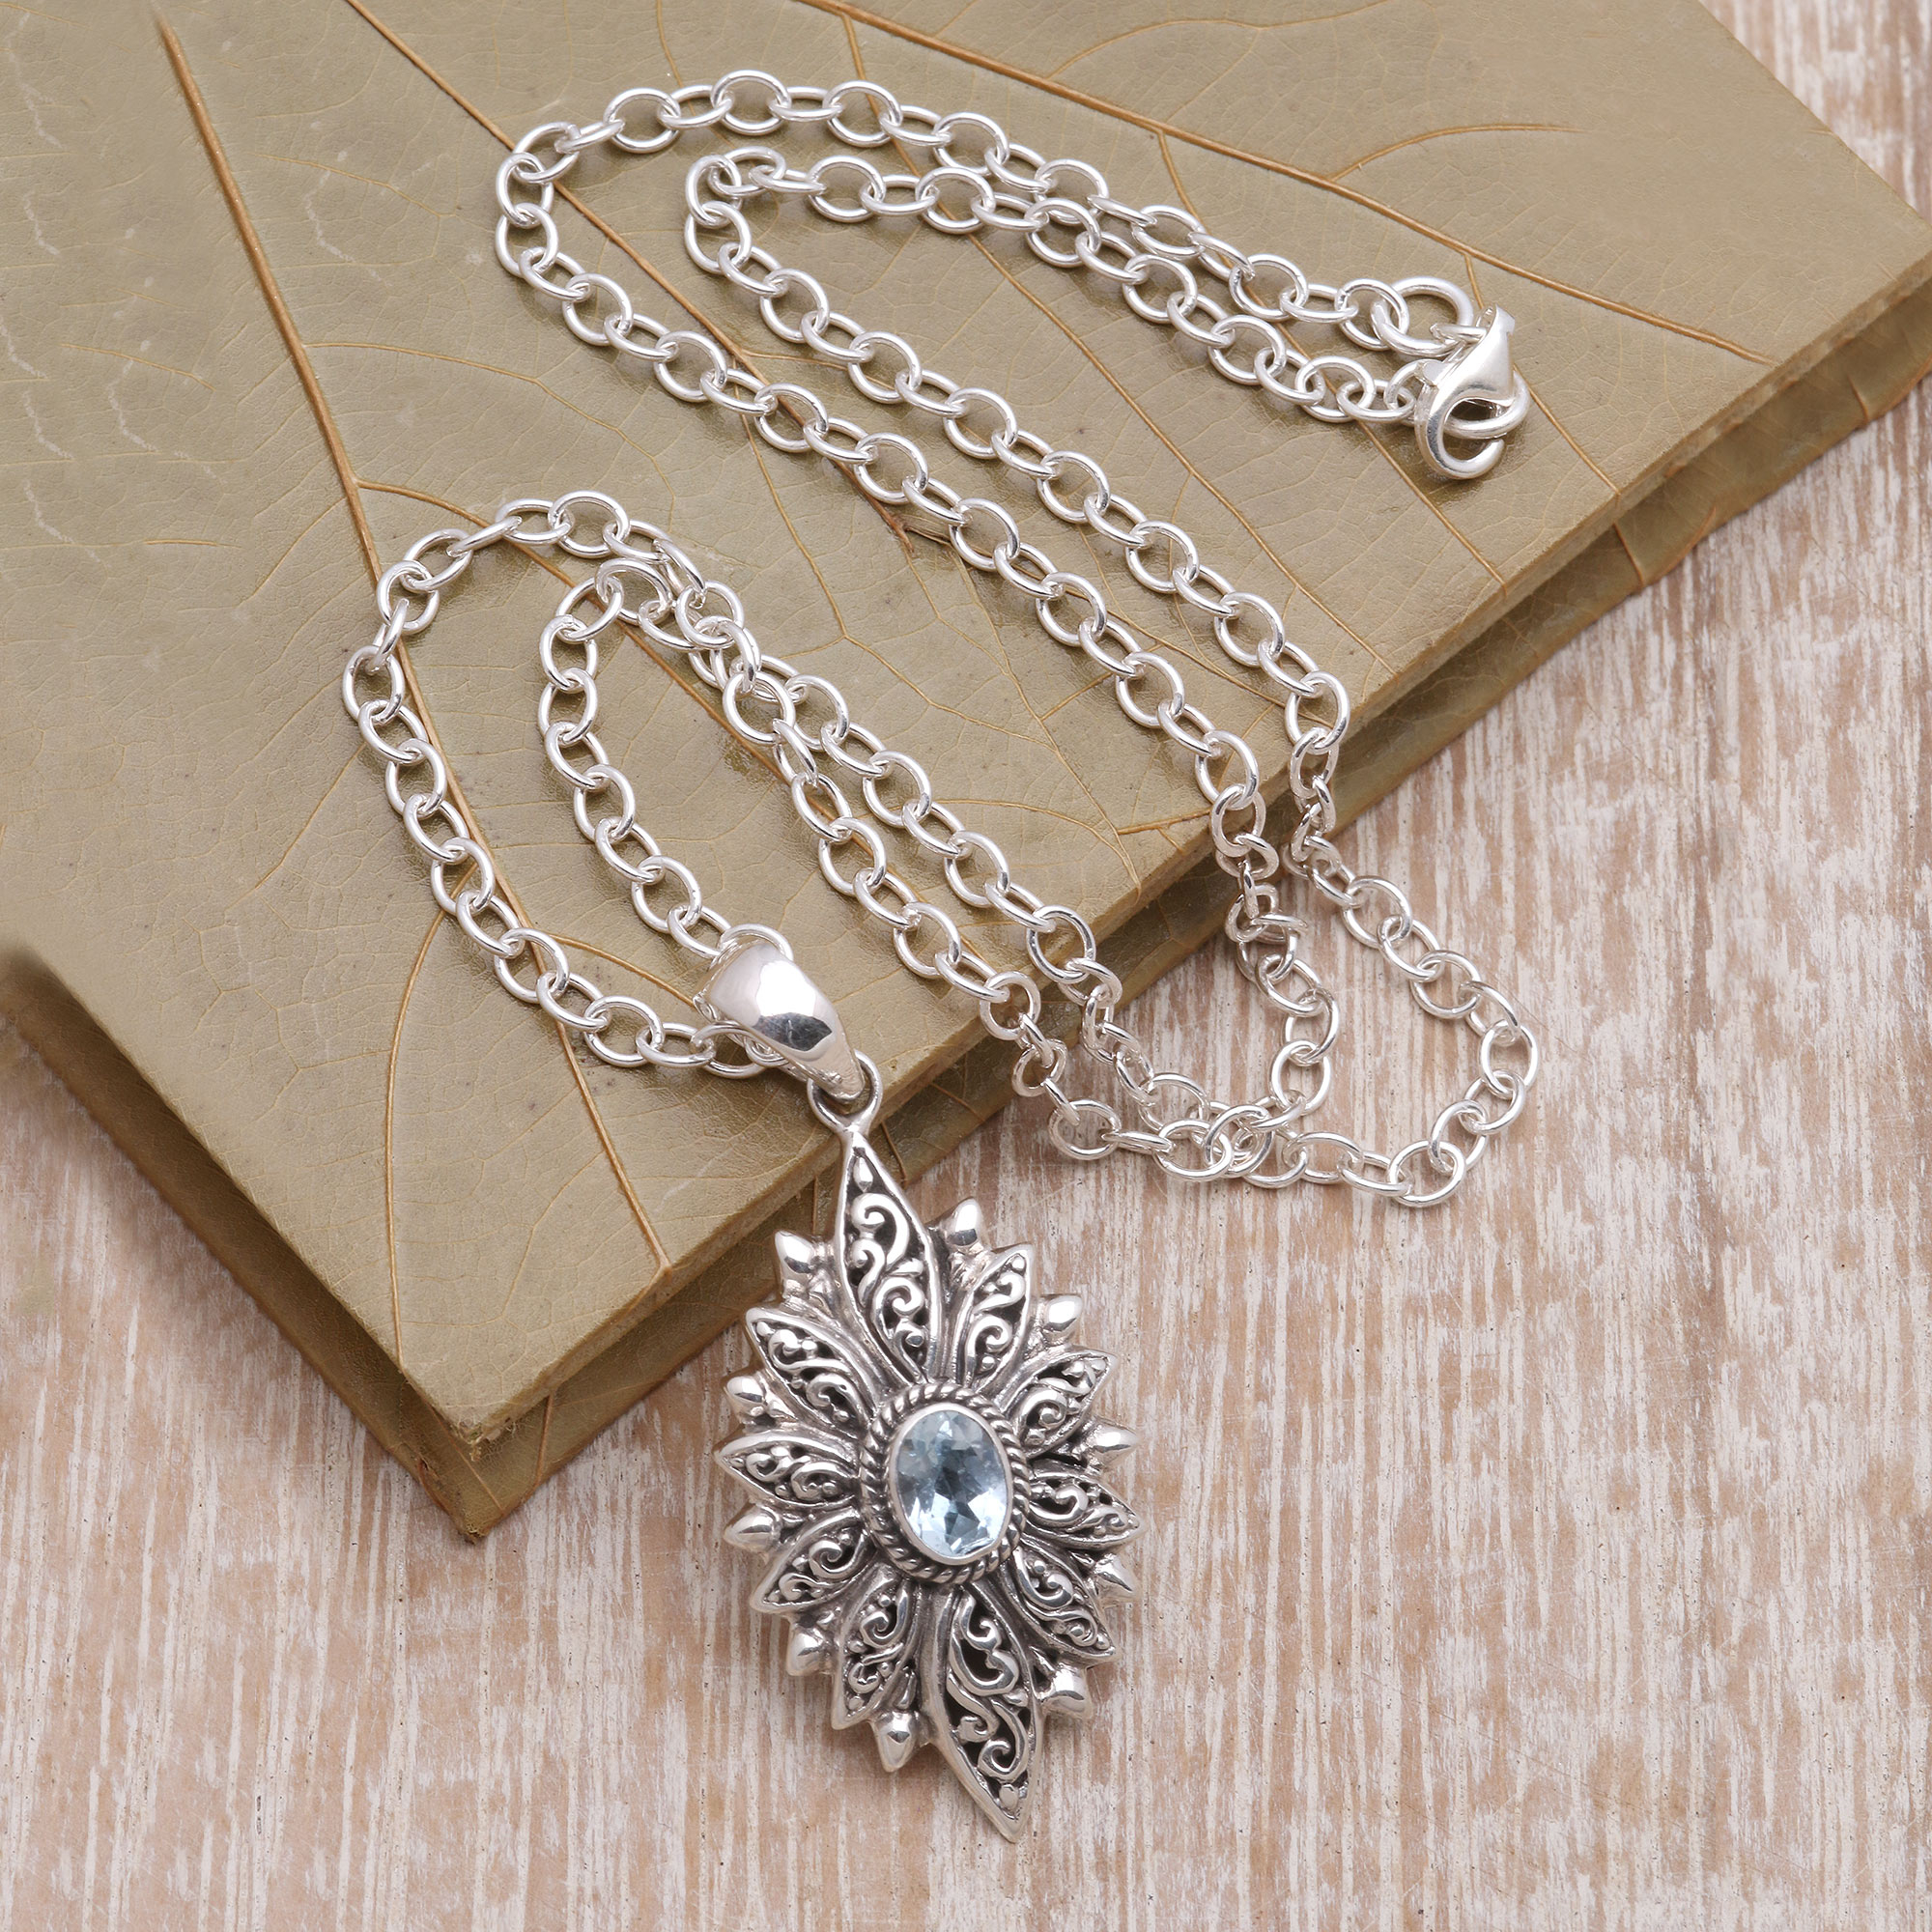 Swirl Pattern Blue Topaz Pendant Necklace Crafted in Bali, 'Glittering  Snowflake'